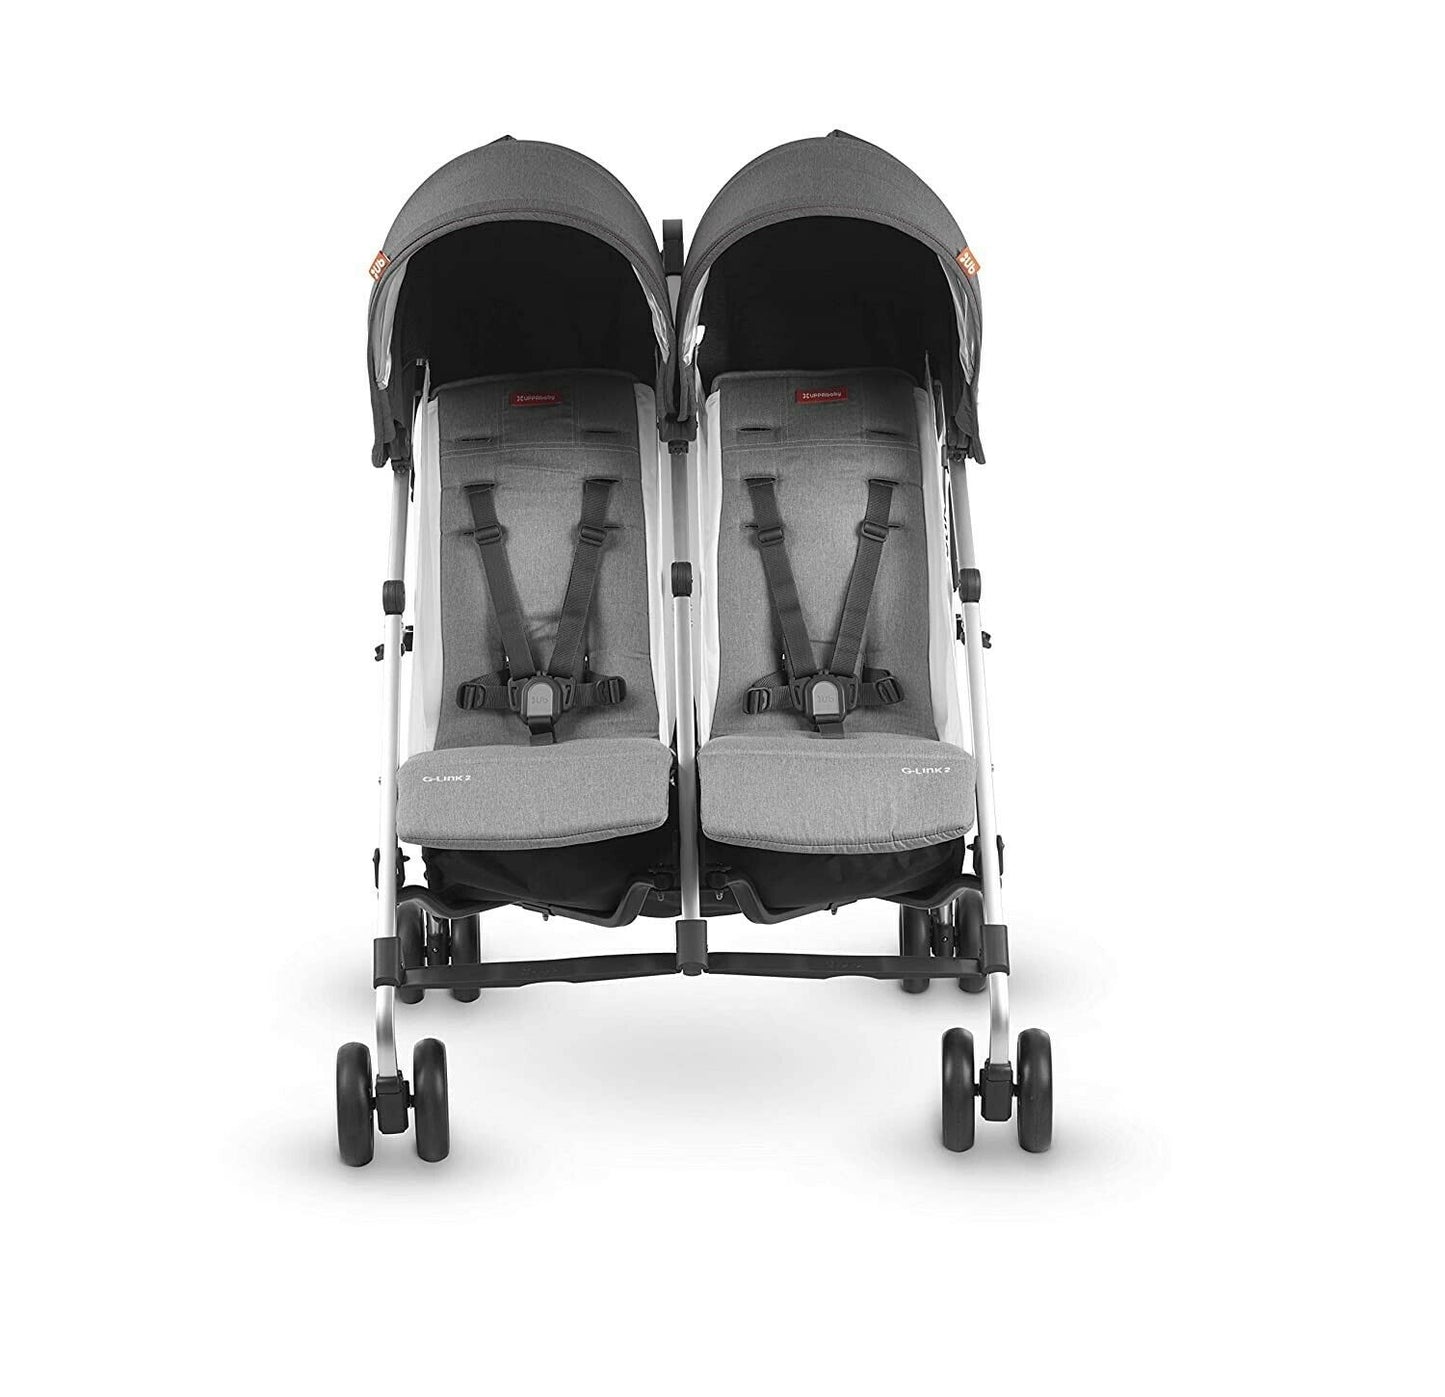 G-LINK 2 Double Baby Stroller by UPPAbaby Compact Lightweight Travel